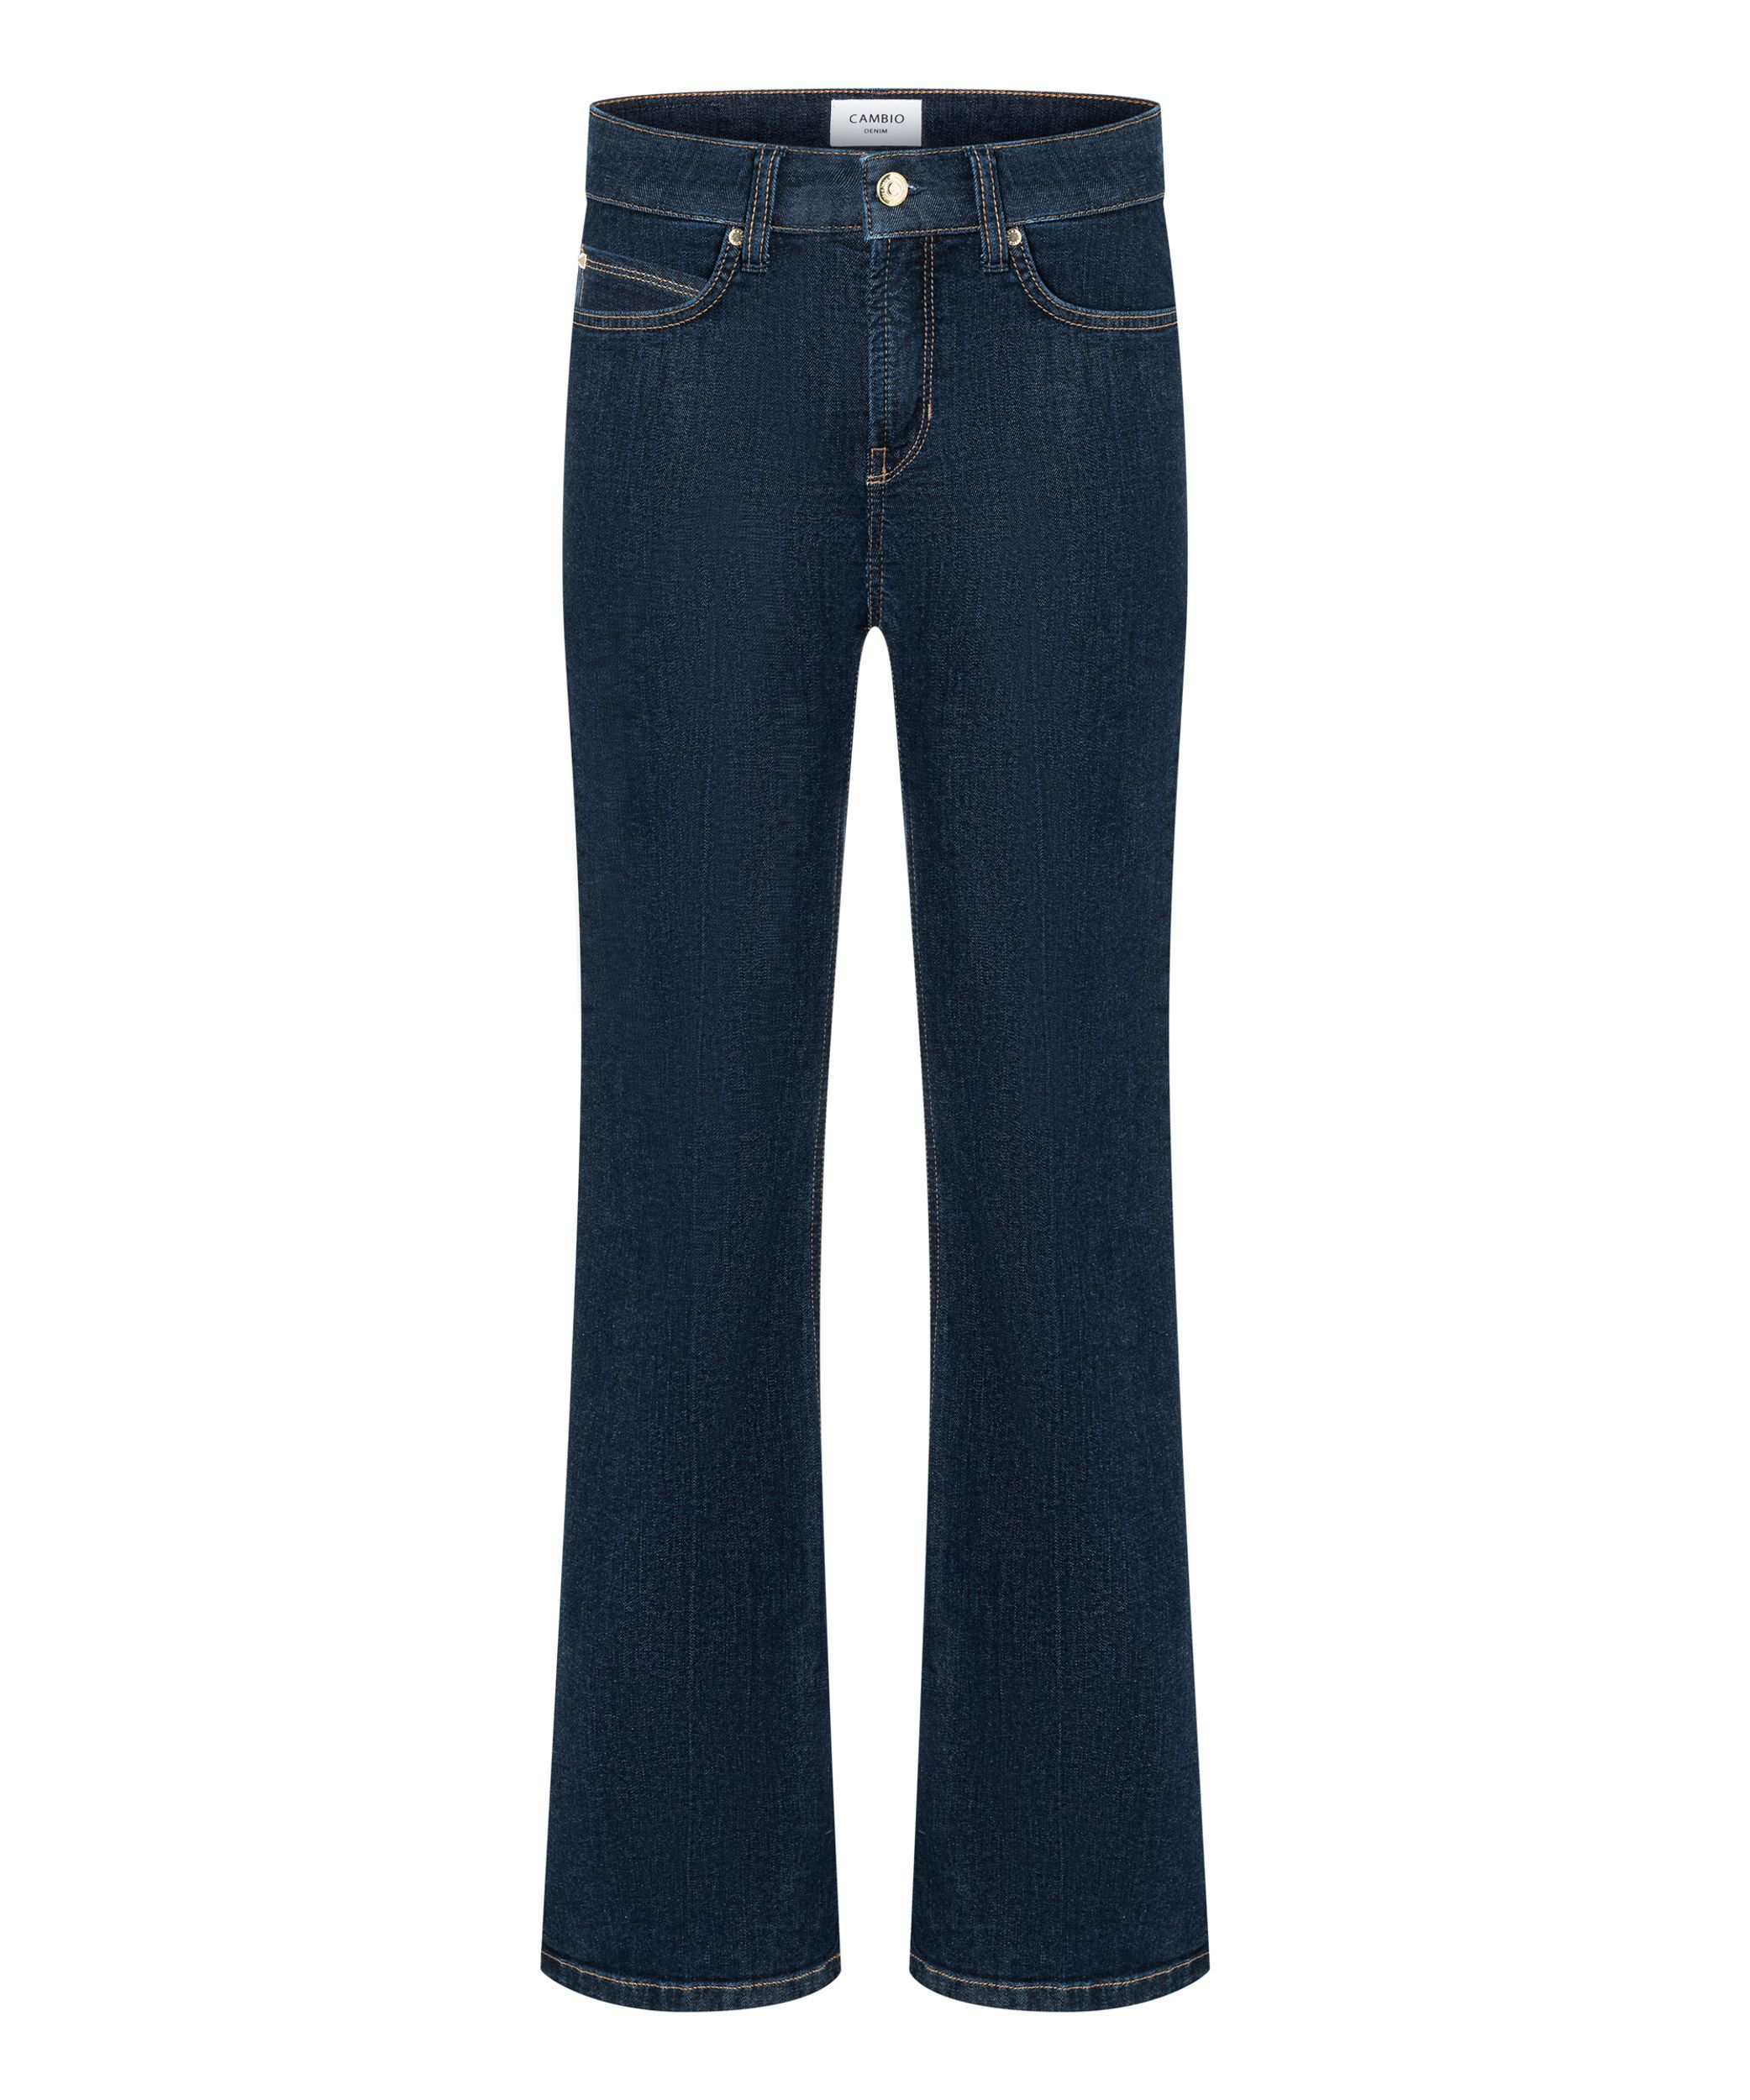 Cambio |  Cambio Skinny Jeans  | modern rinsed